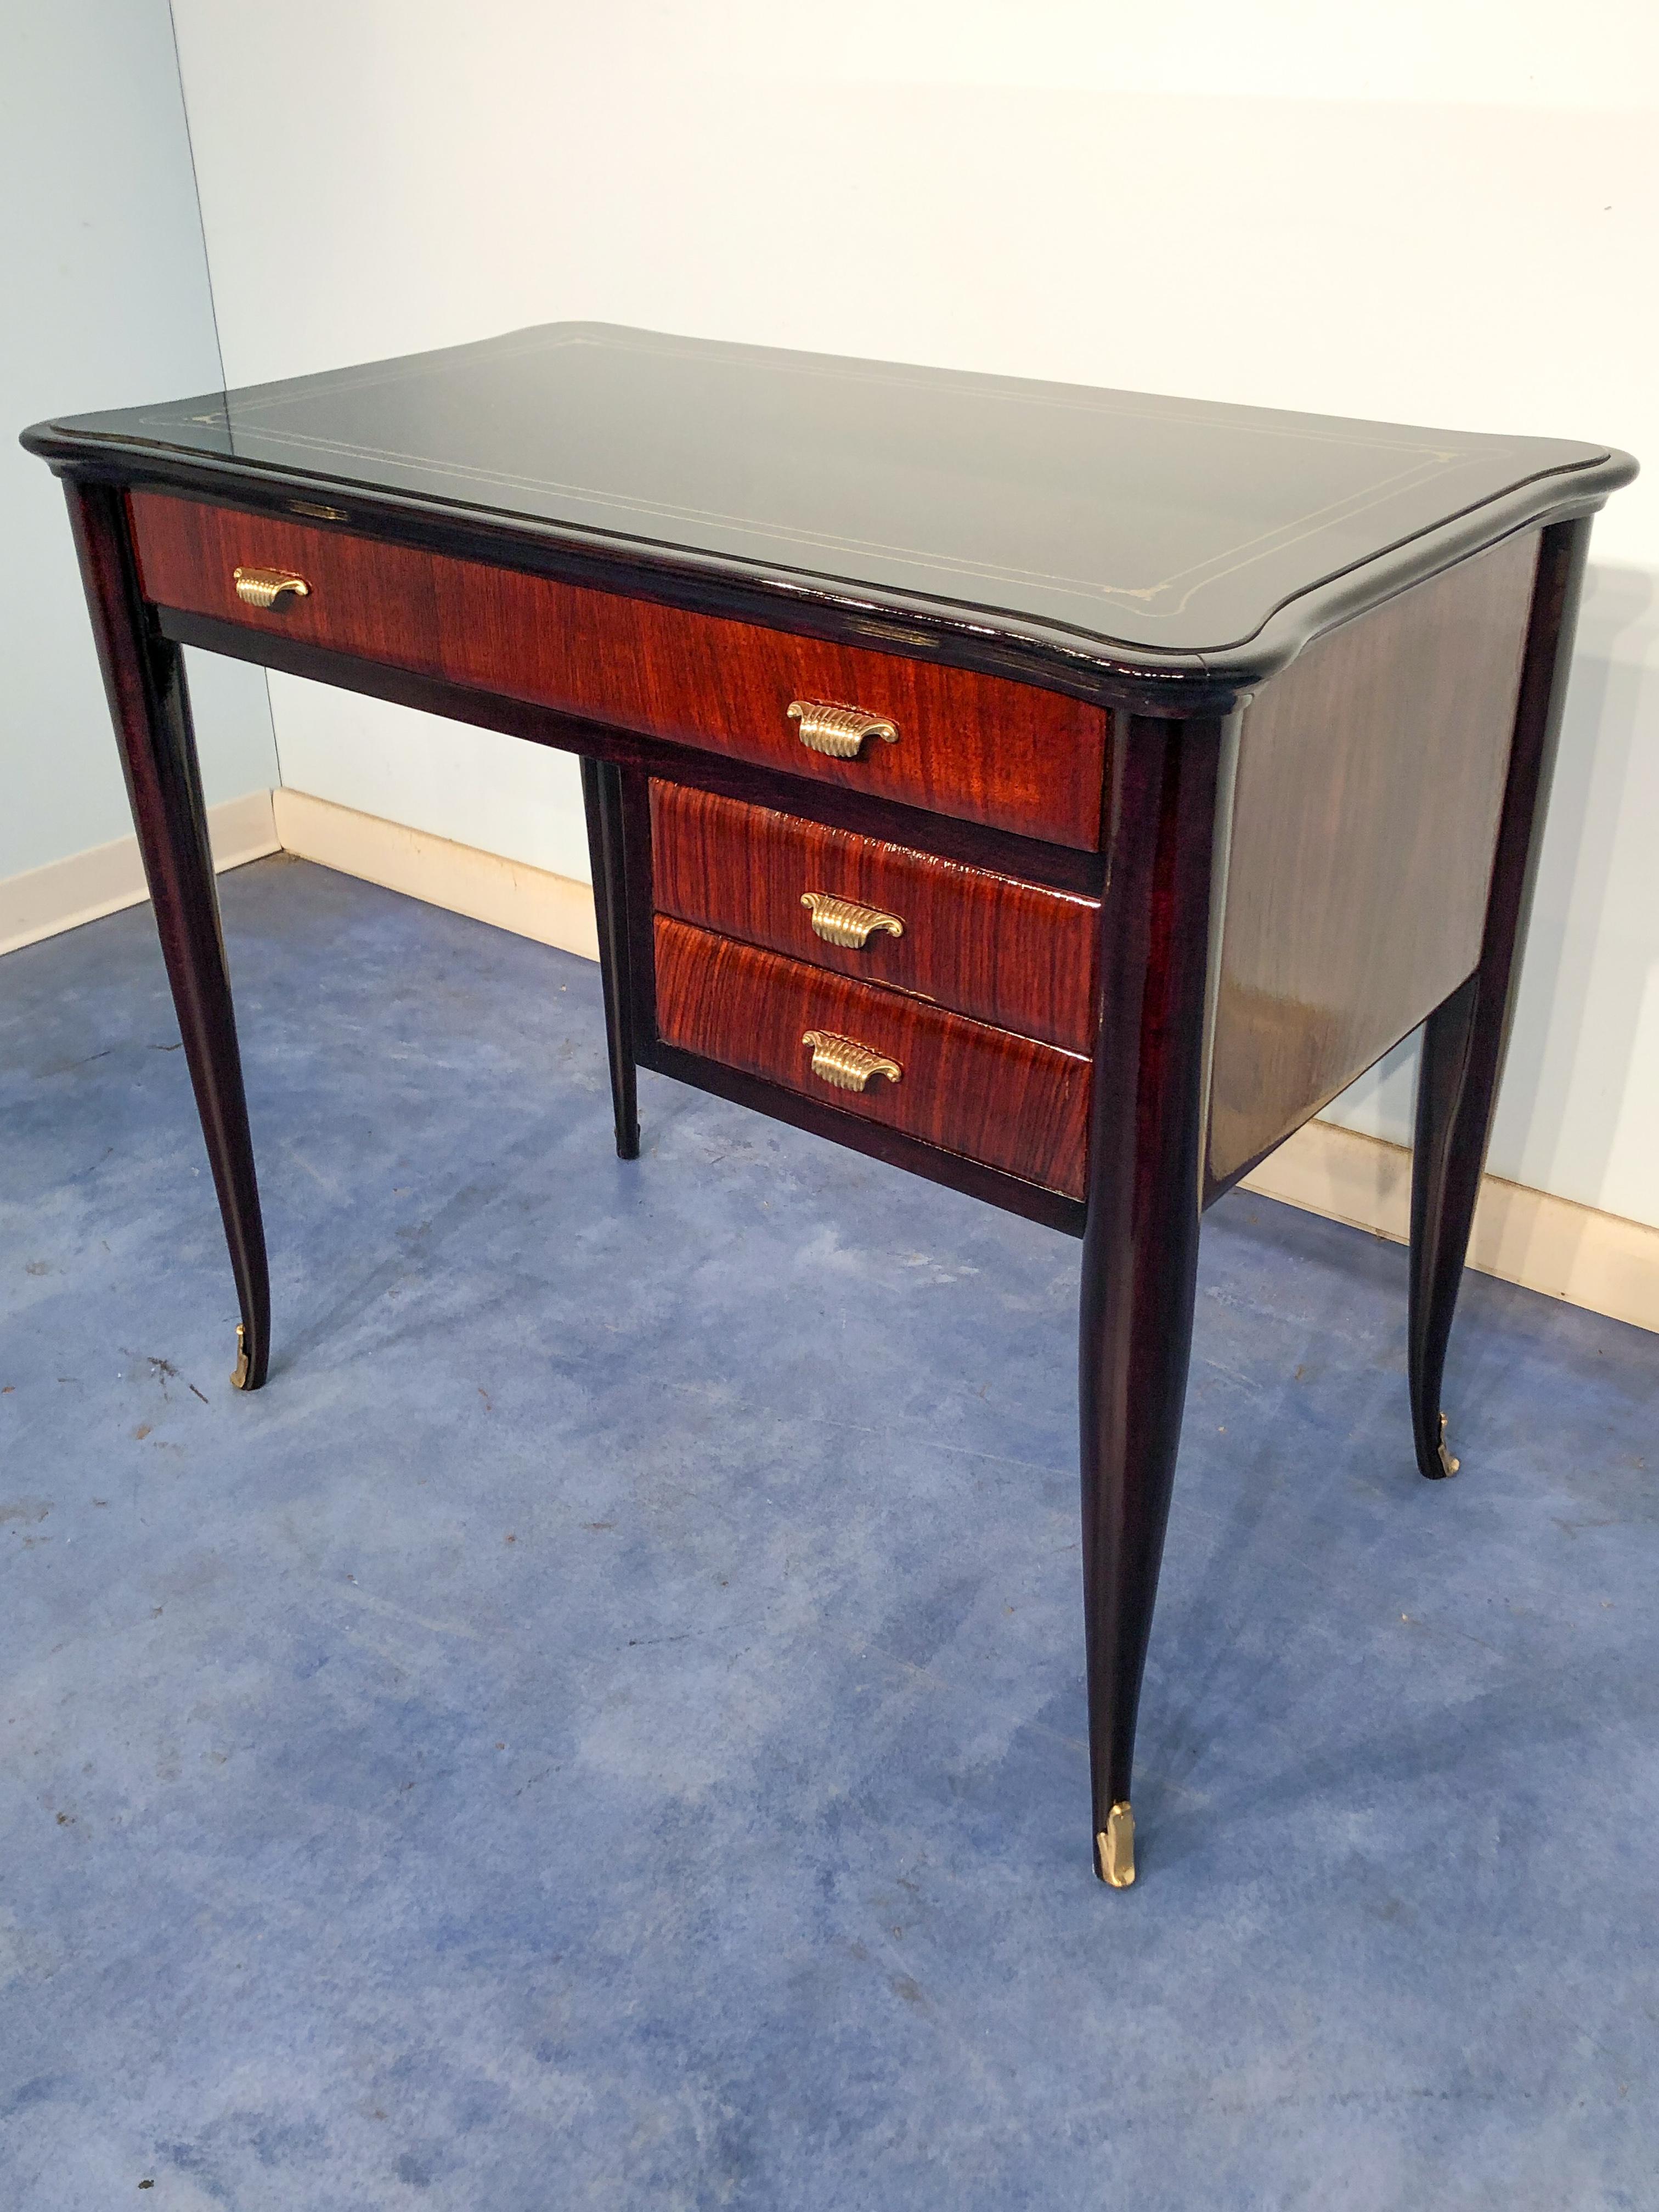 Italian Mid-Century Modern Small Desk and Chair Attributed to Paolo Buffa, 1950s For Sale 1